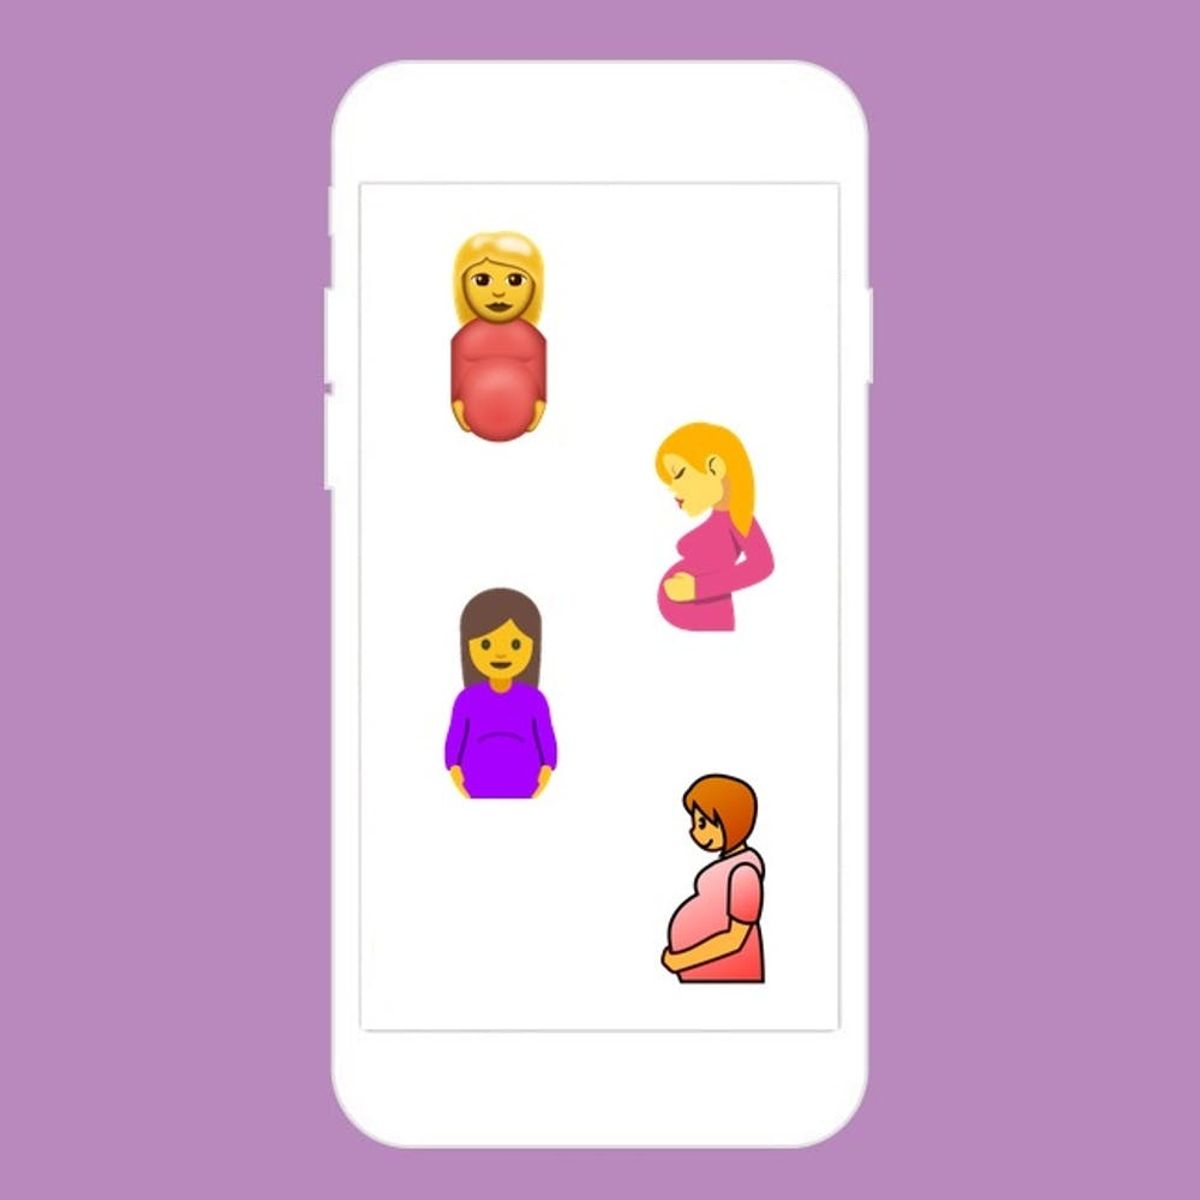 Emoji Are Causing Major Controversy for the Way They Depict Women